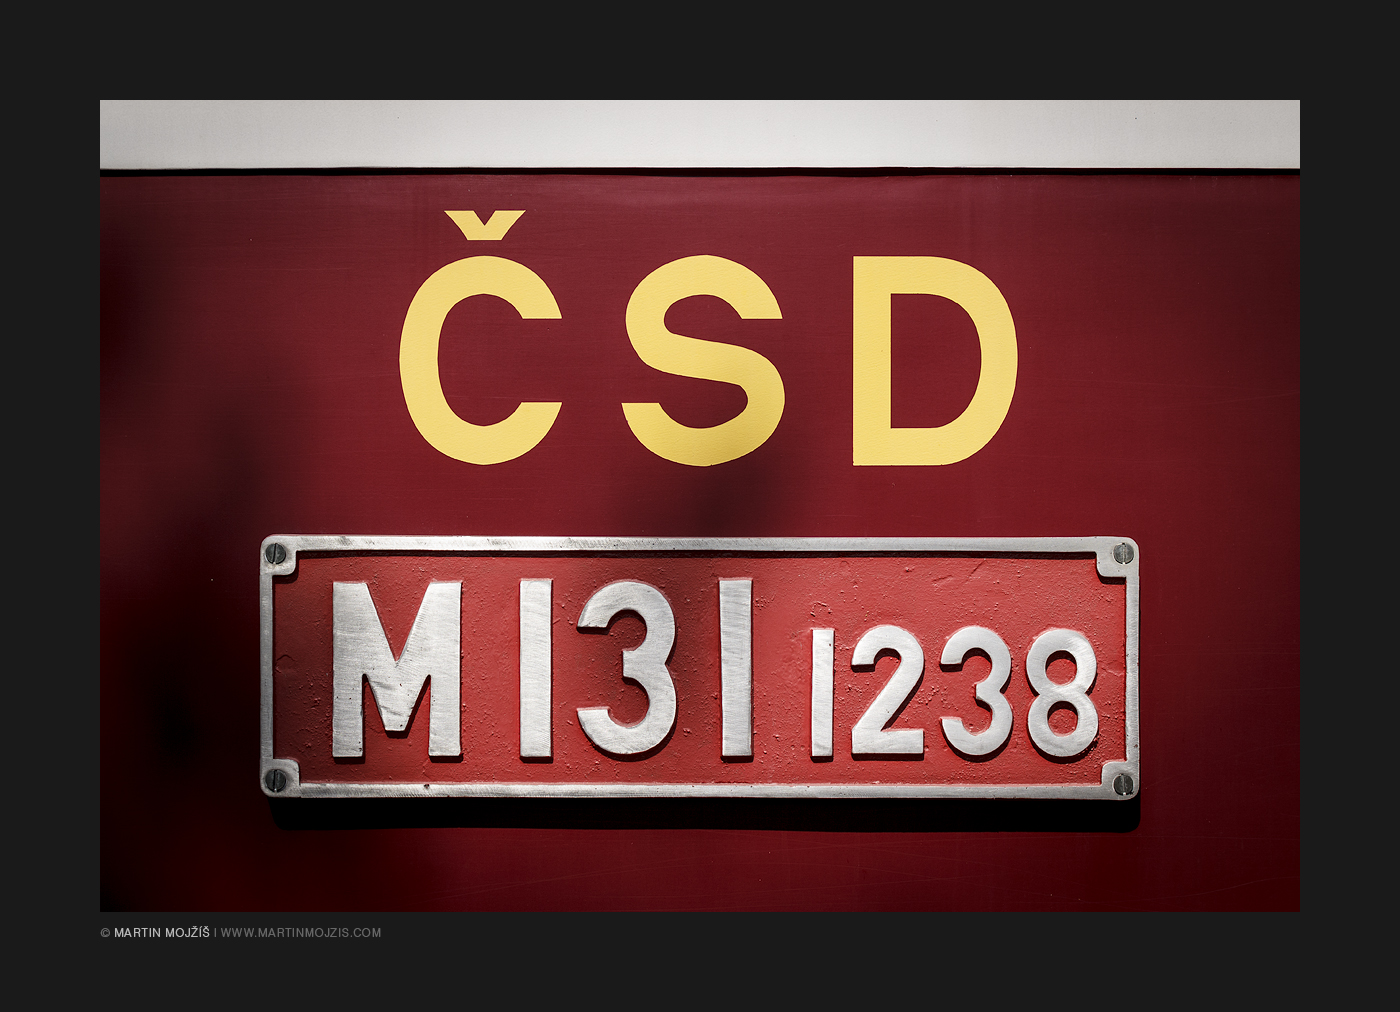 CSD emblem and type plate on the red engine train M131 1238. Kolesovka 2017.